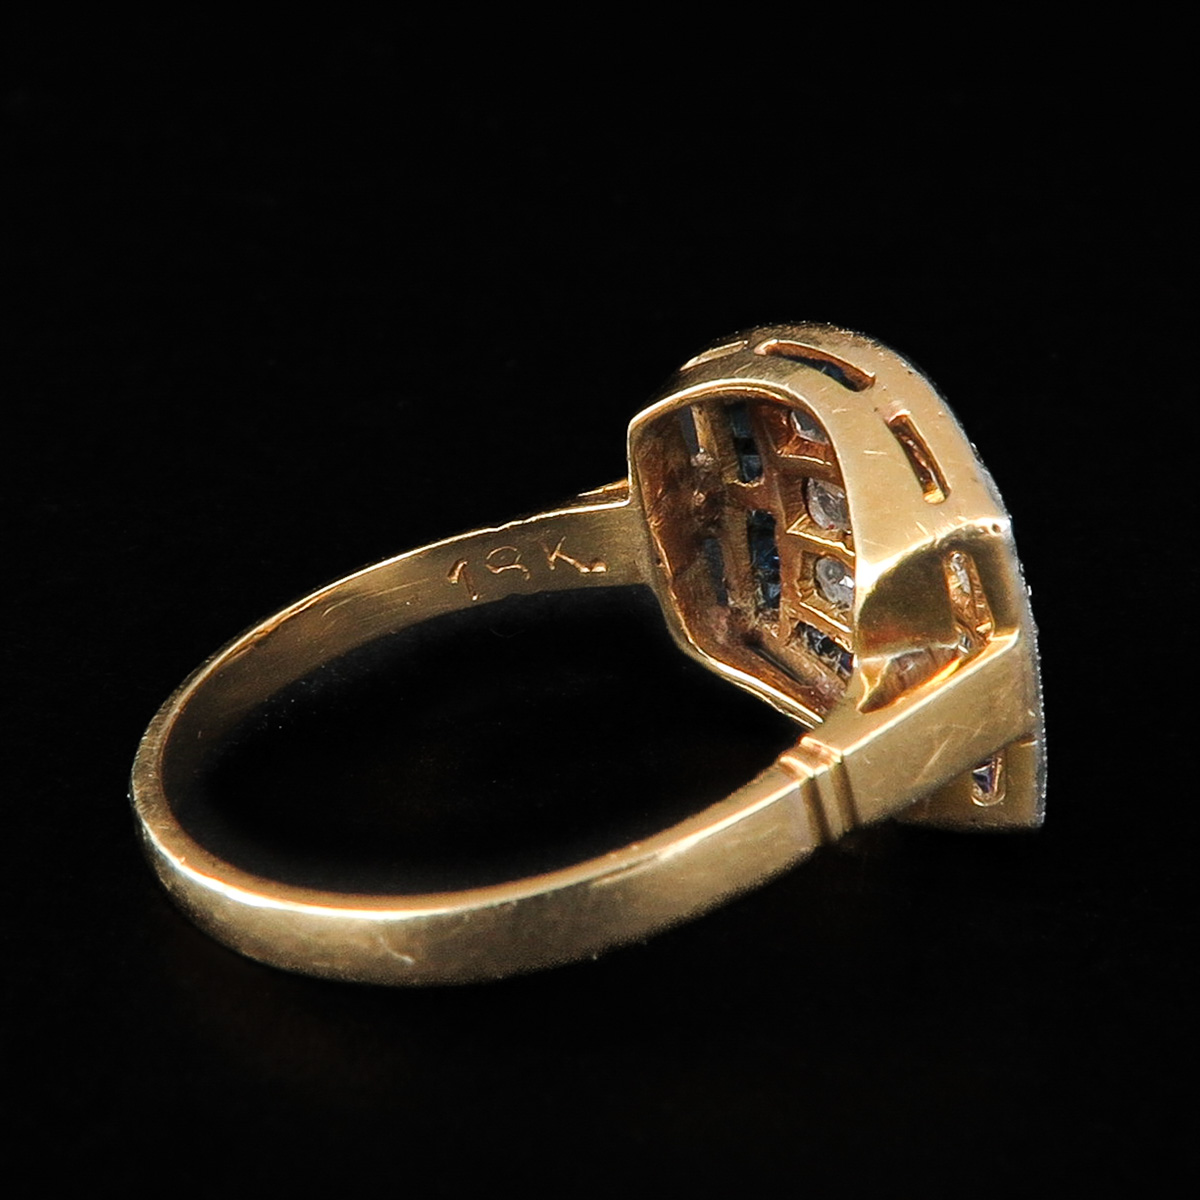 A Ladies Diamond and Sapphire Ring - Image 5 of 5